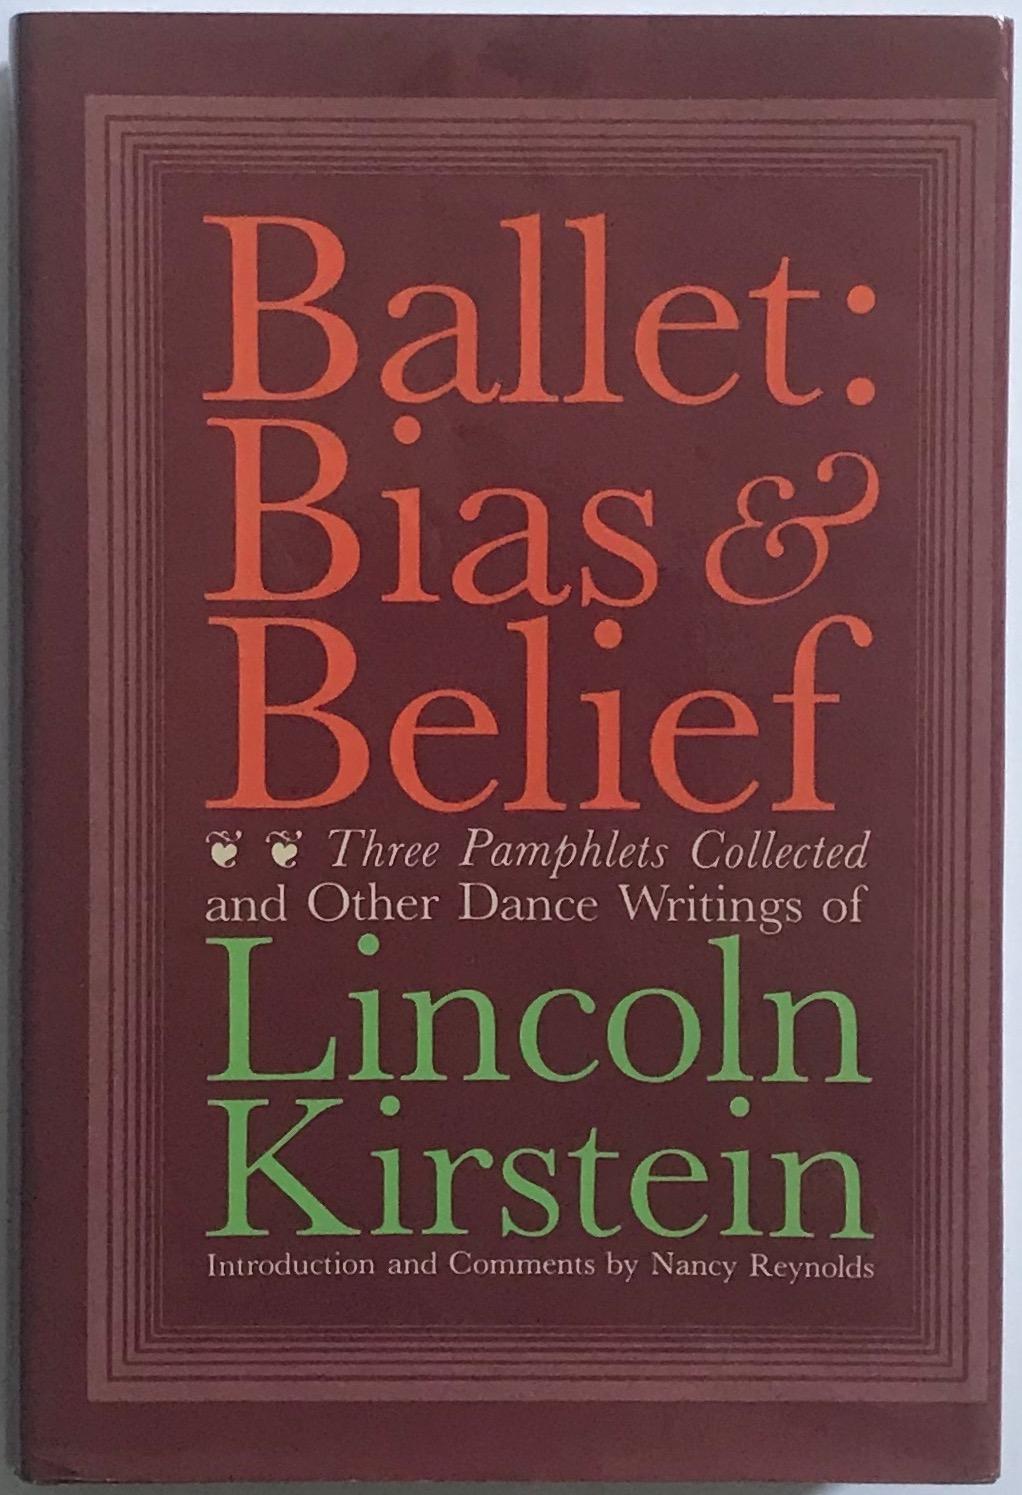 Ballet: Bias and Belief: Three Pamphlets Collected and Other Dance Writings of Lincoln Kirstein - Lincoln Kirstein